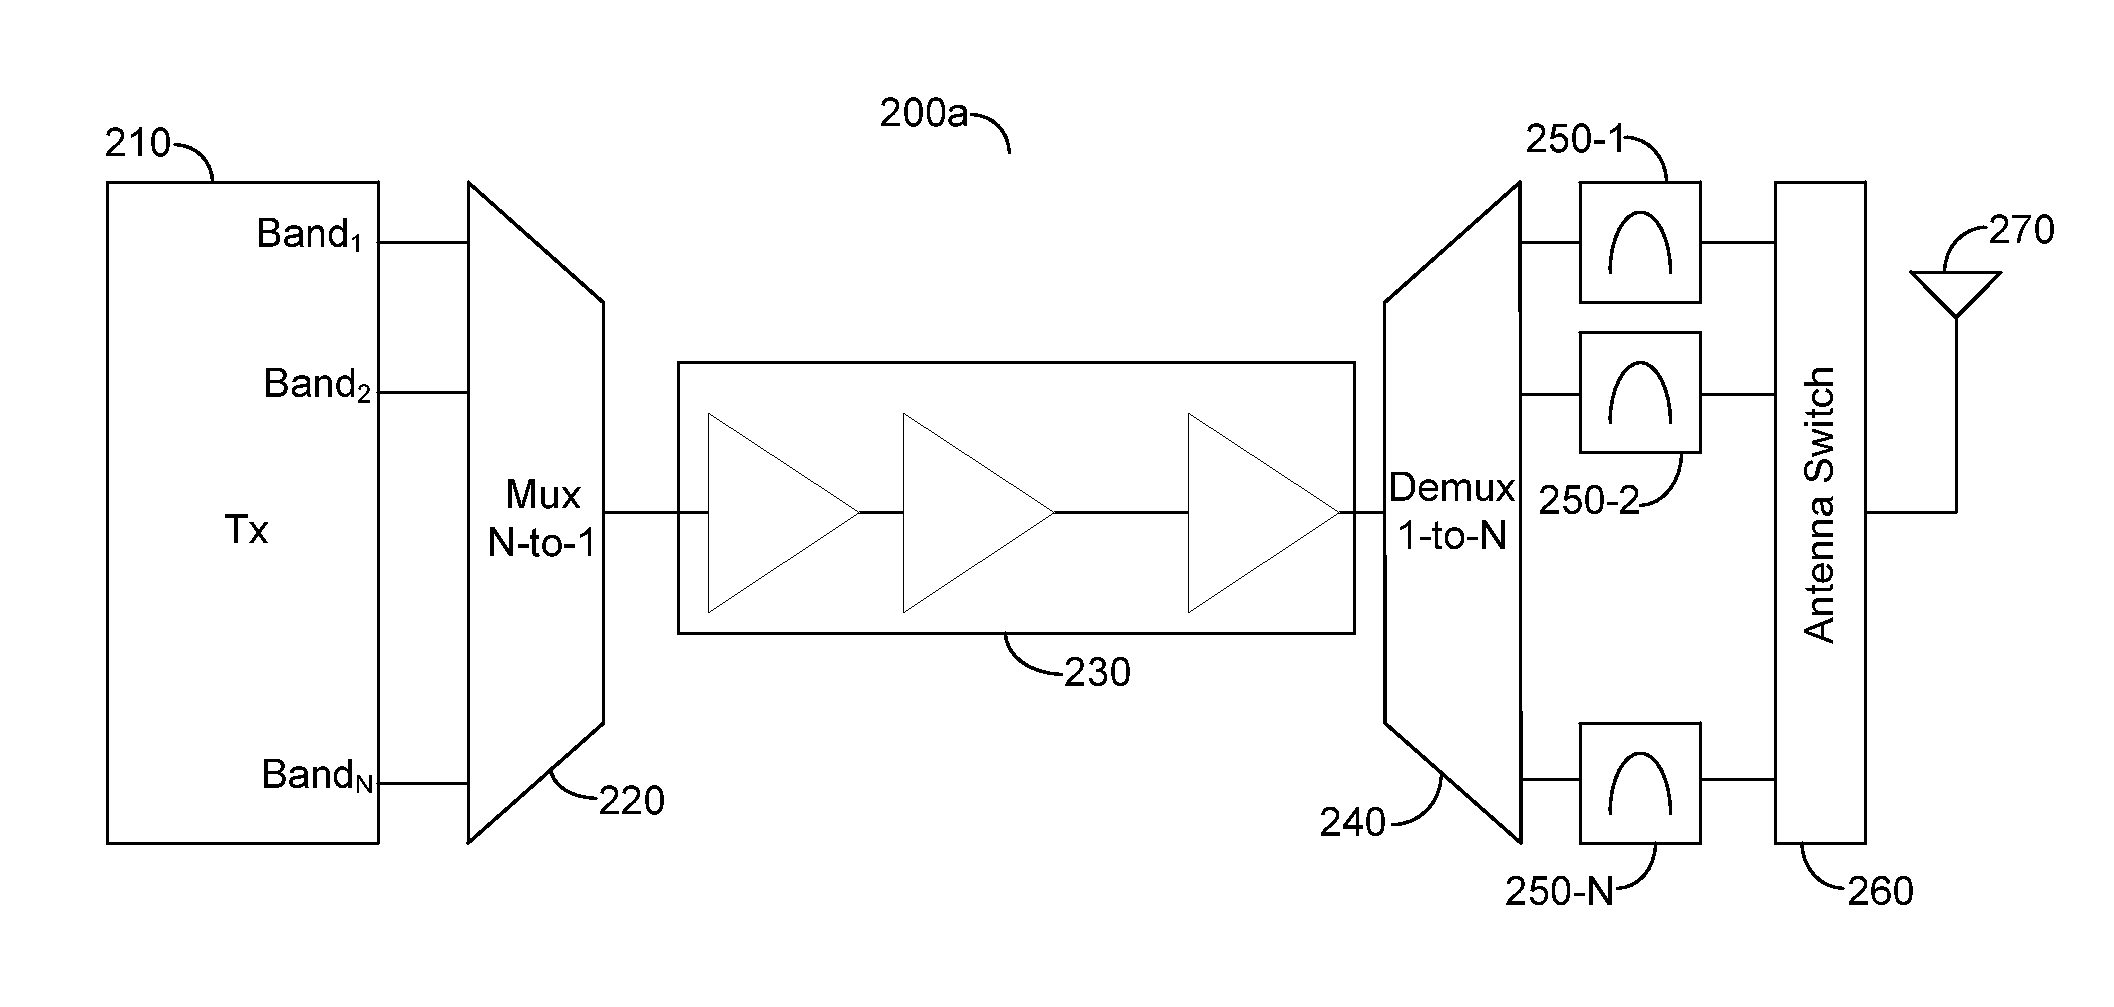 Multi-Band/Multi-Mode Power Amplifier with Signal Path Hardware Sharing